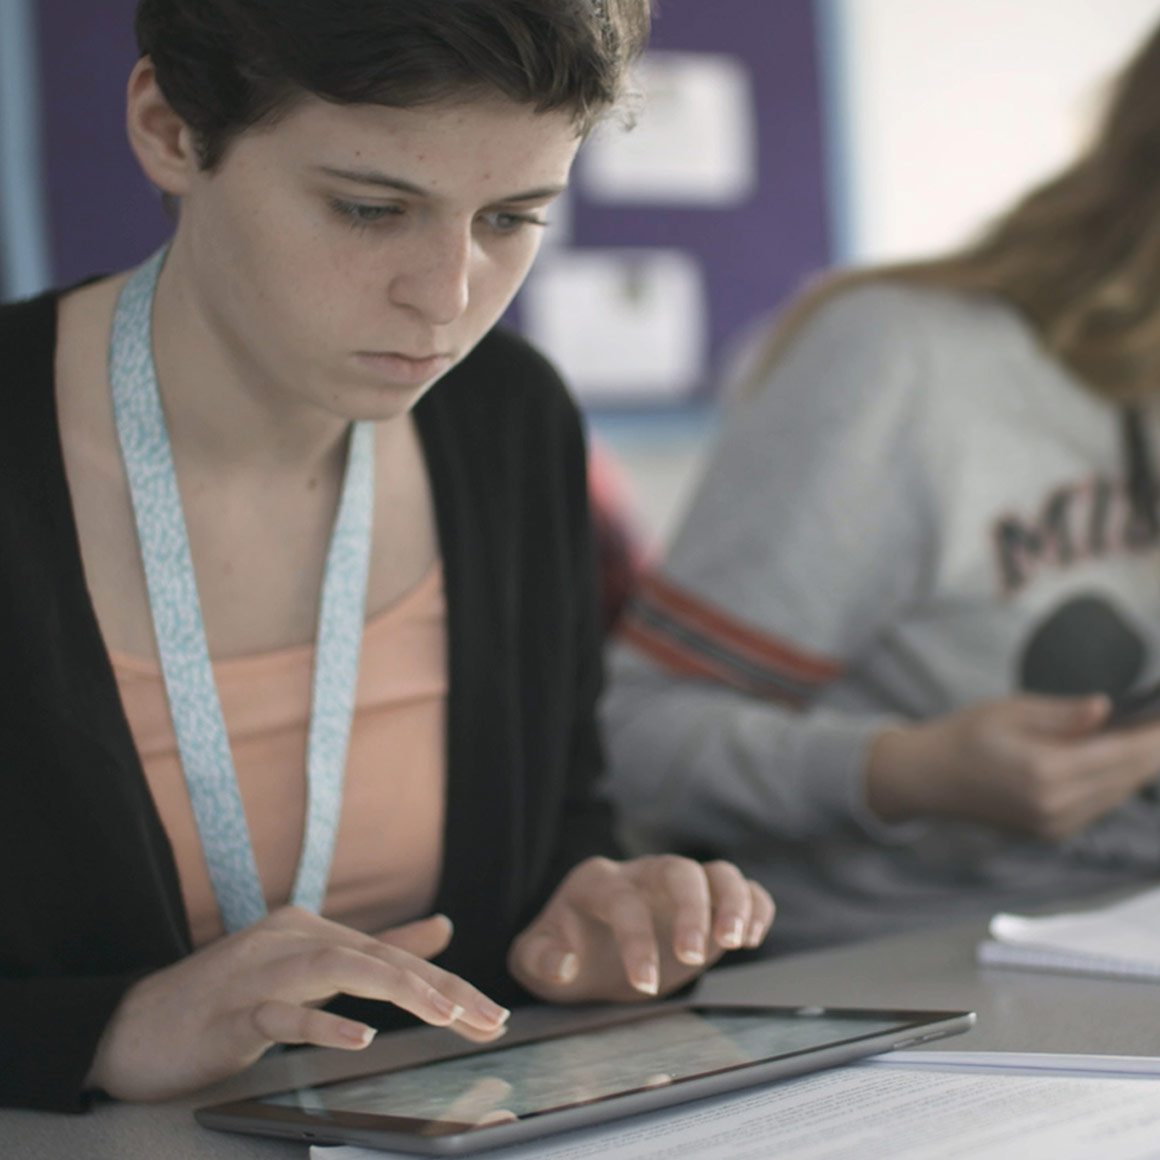 Reaching all learners with iPad